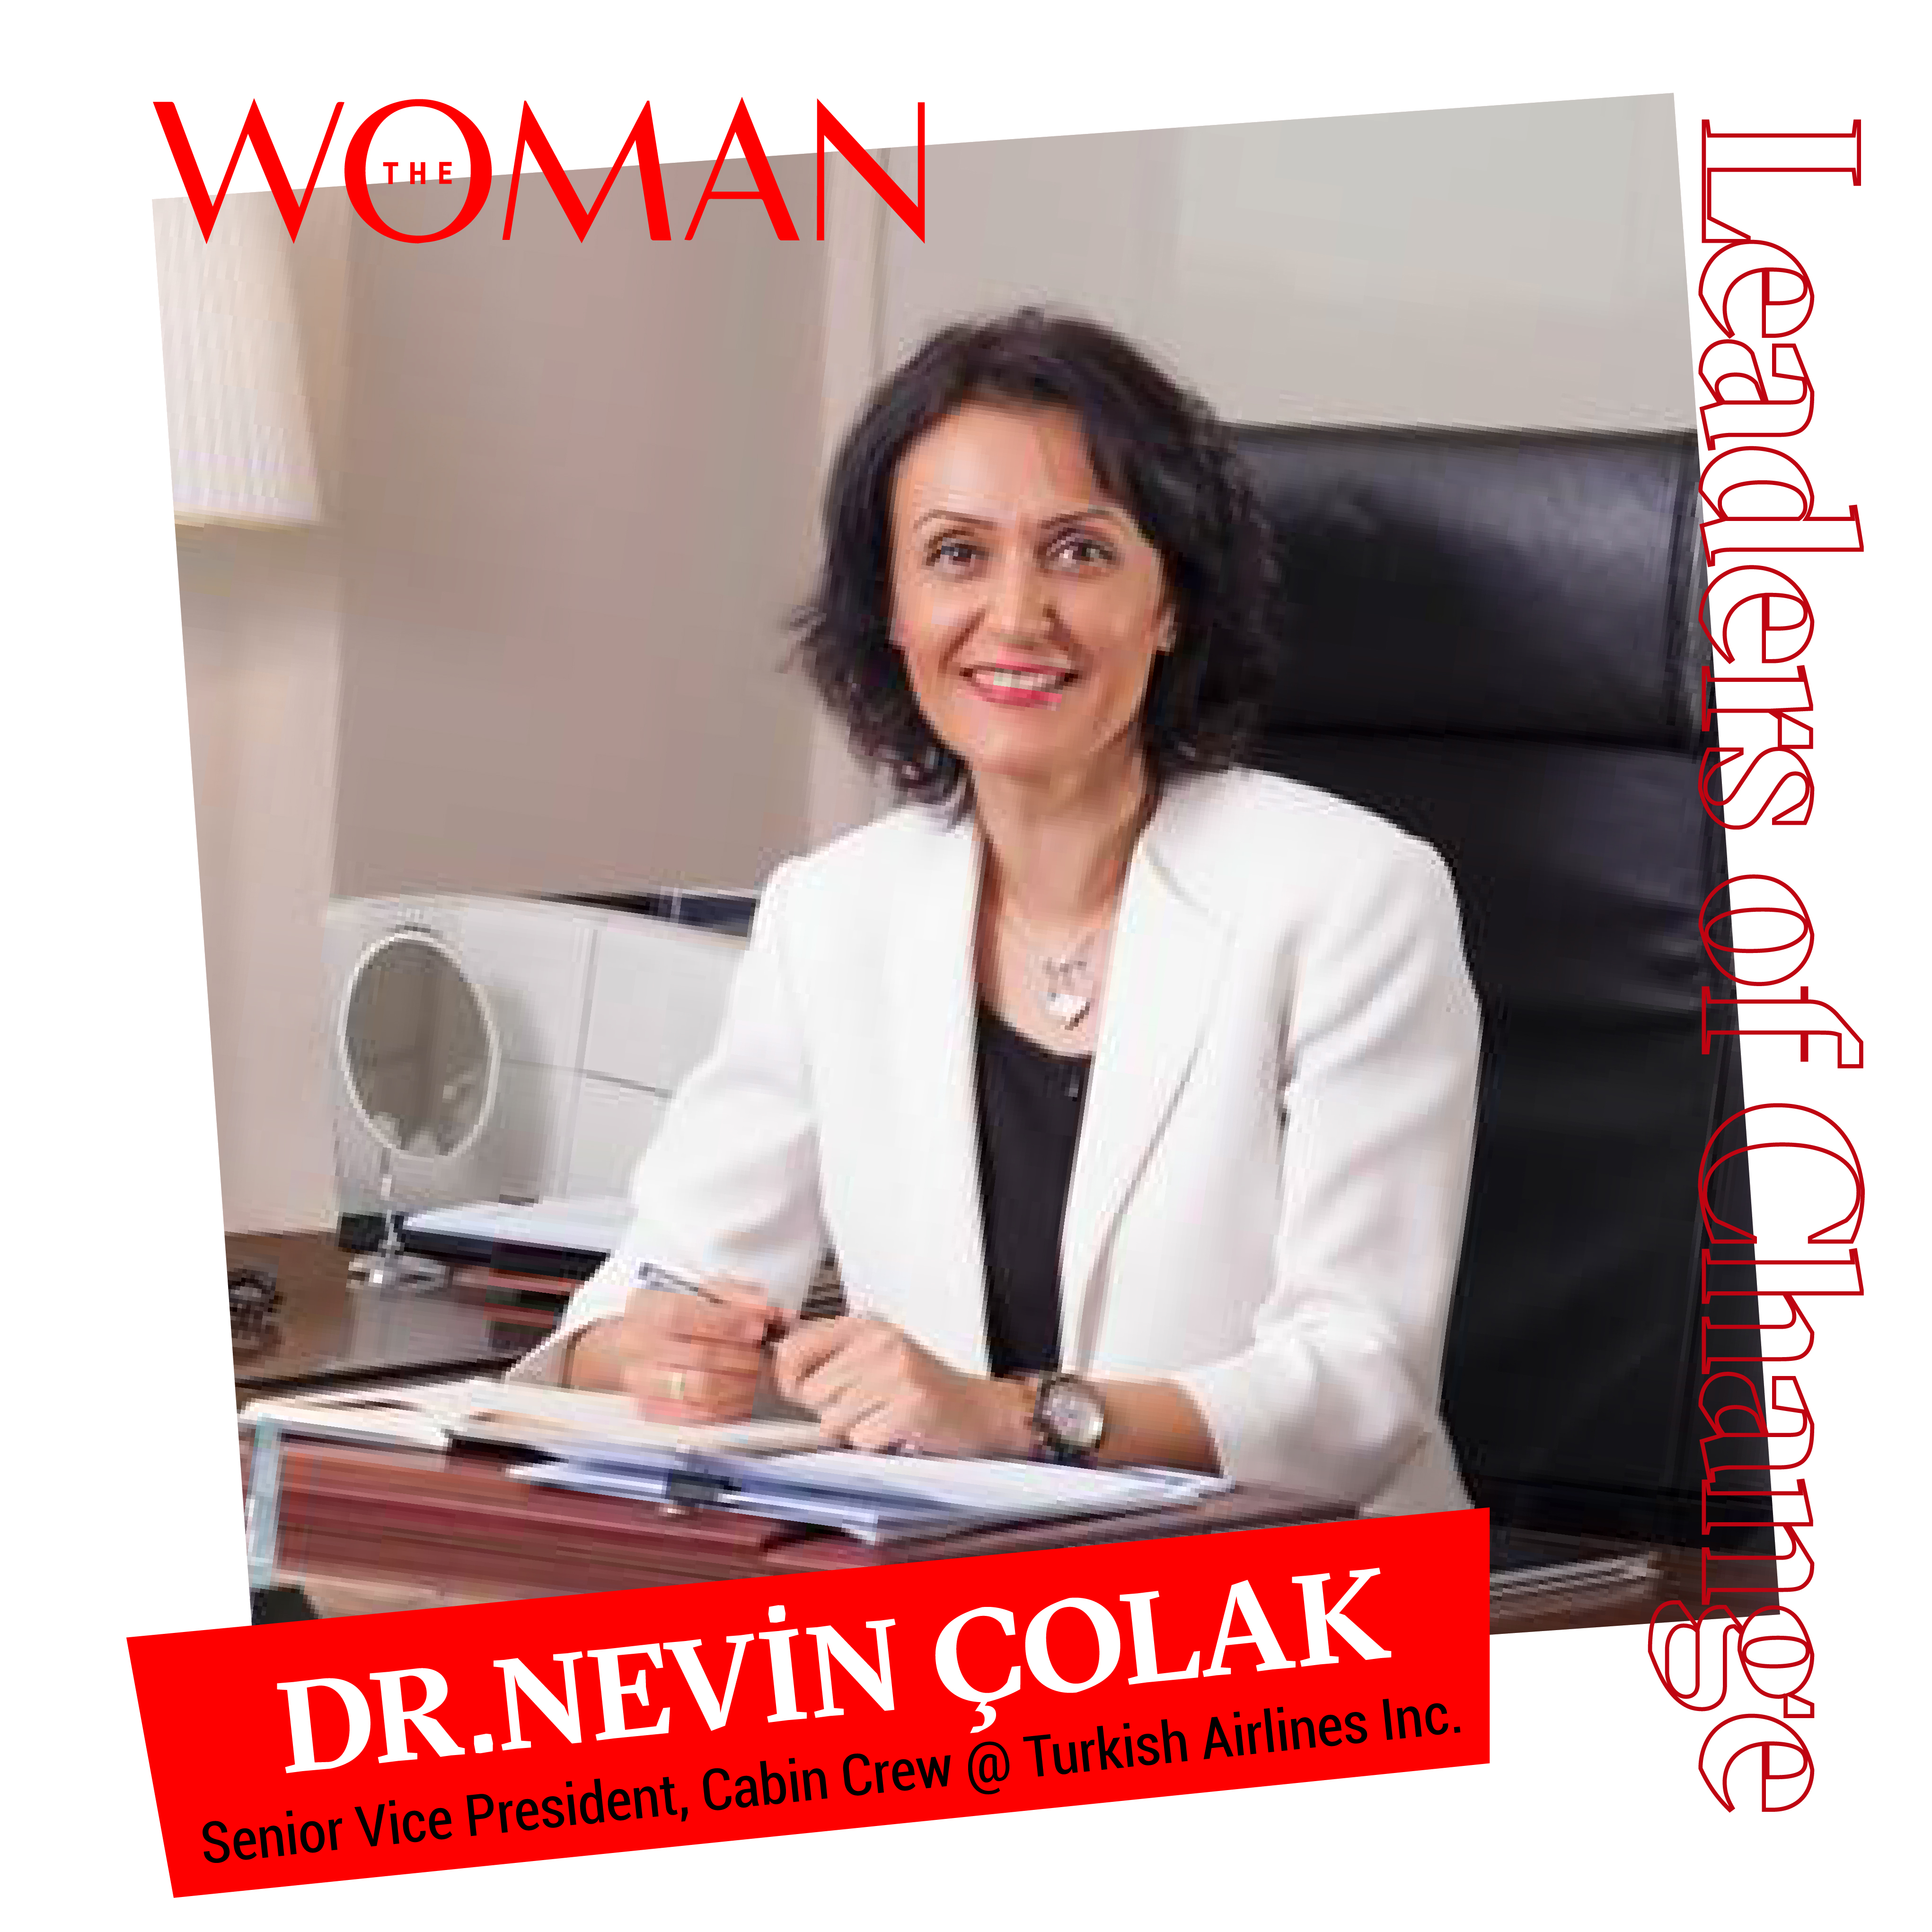 THE WOMAN DR NEVIN COLAK